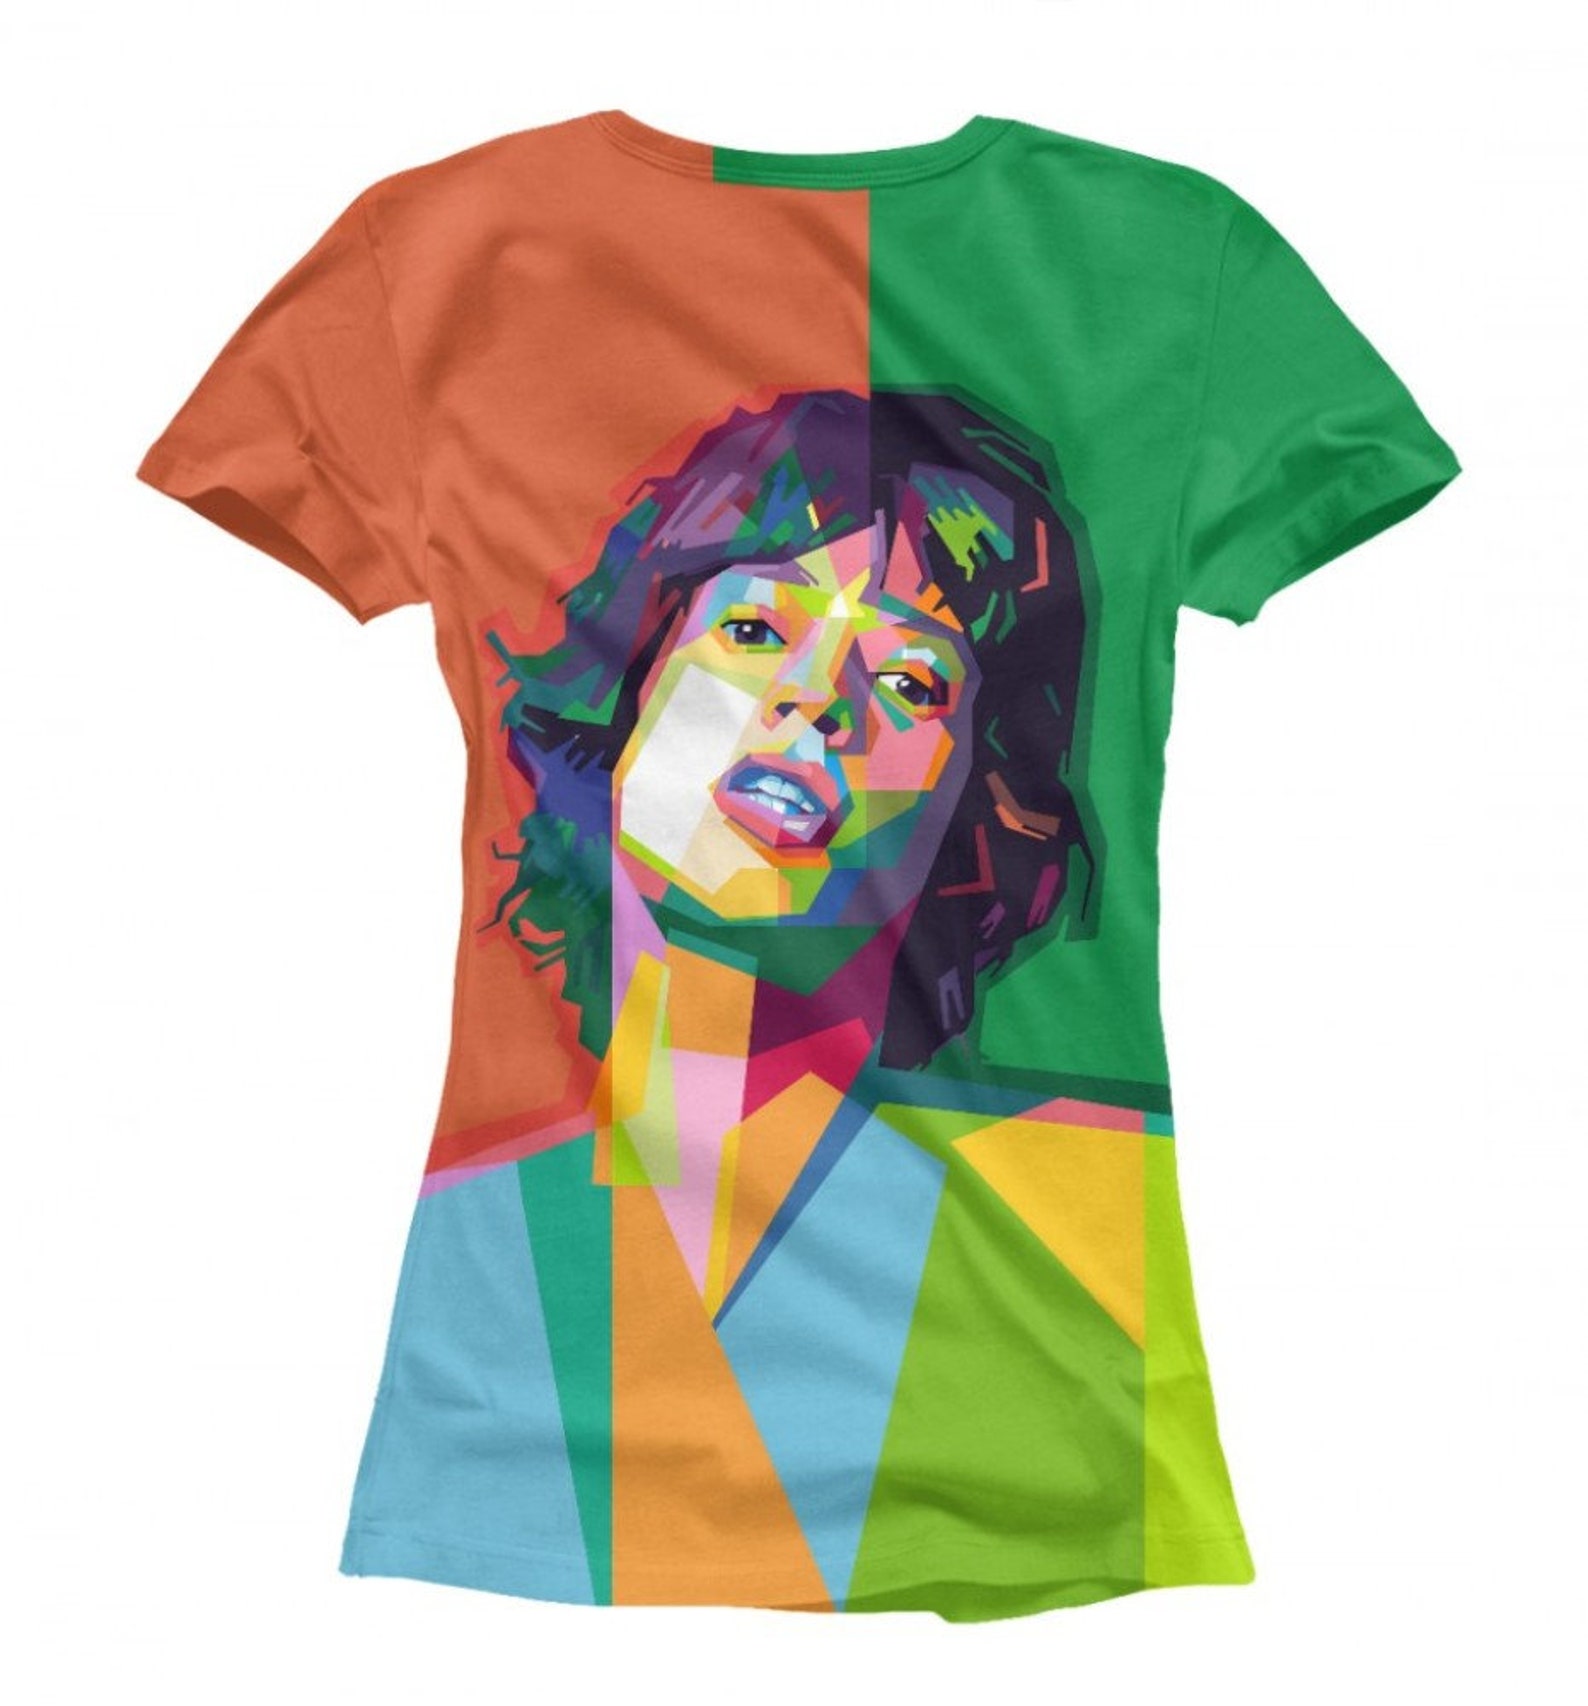 Mick Jagger Colorful T-Shirt The Rolling Stones Rock Tee | Etsy